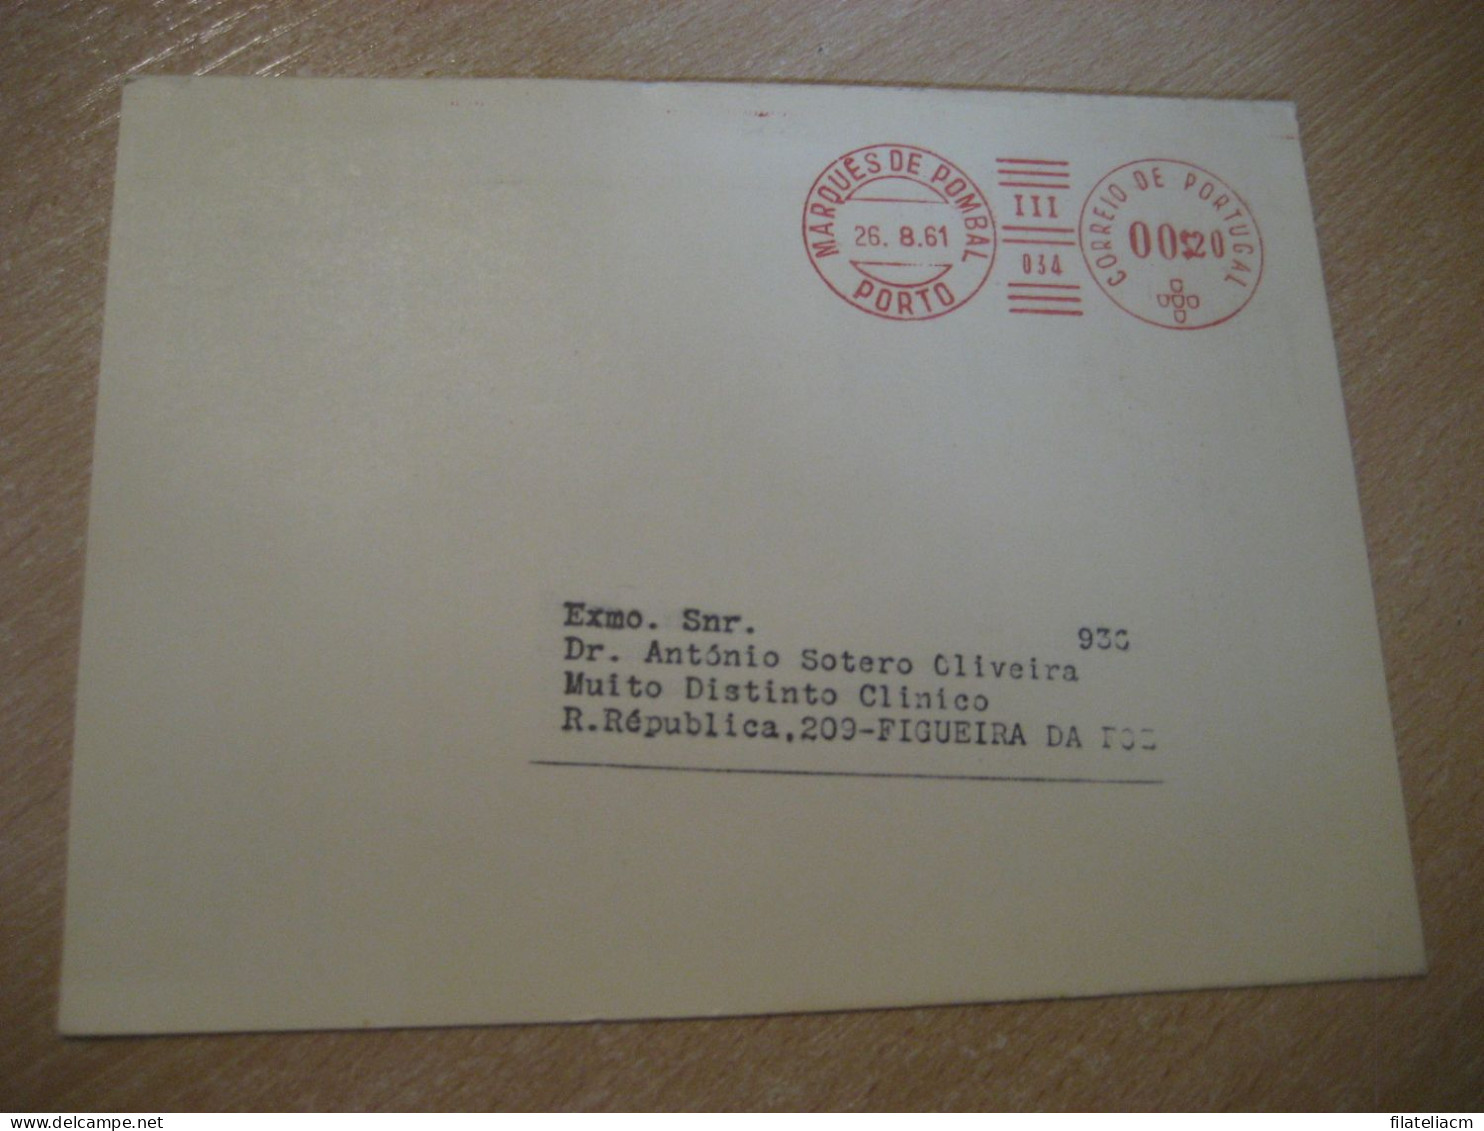 PORTO 1961 To Figueira Da Foz BIAL Cosatetril Tetraciclina Glucosamina Pharmacy Health Meter Mail Document Card PORTUGAL - Lettres & Documents